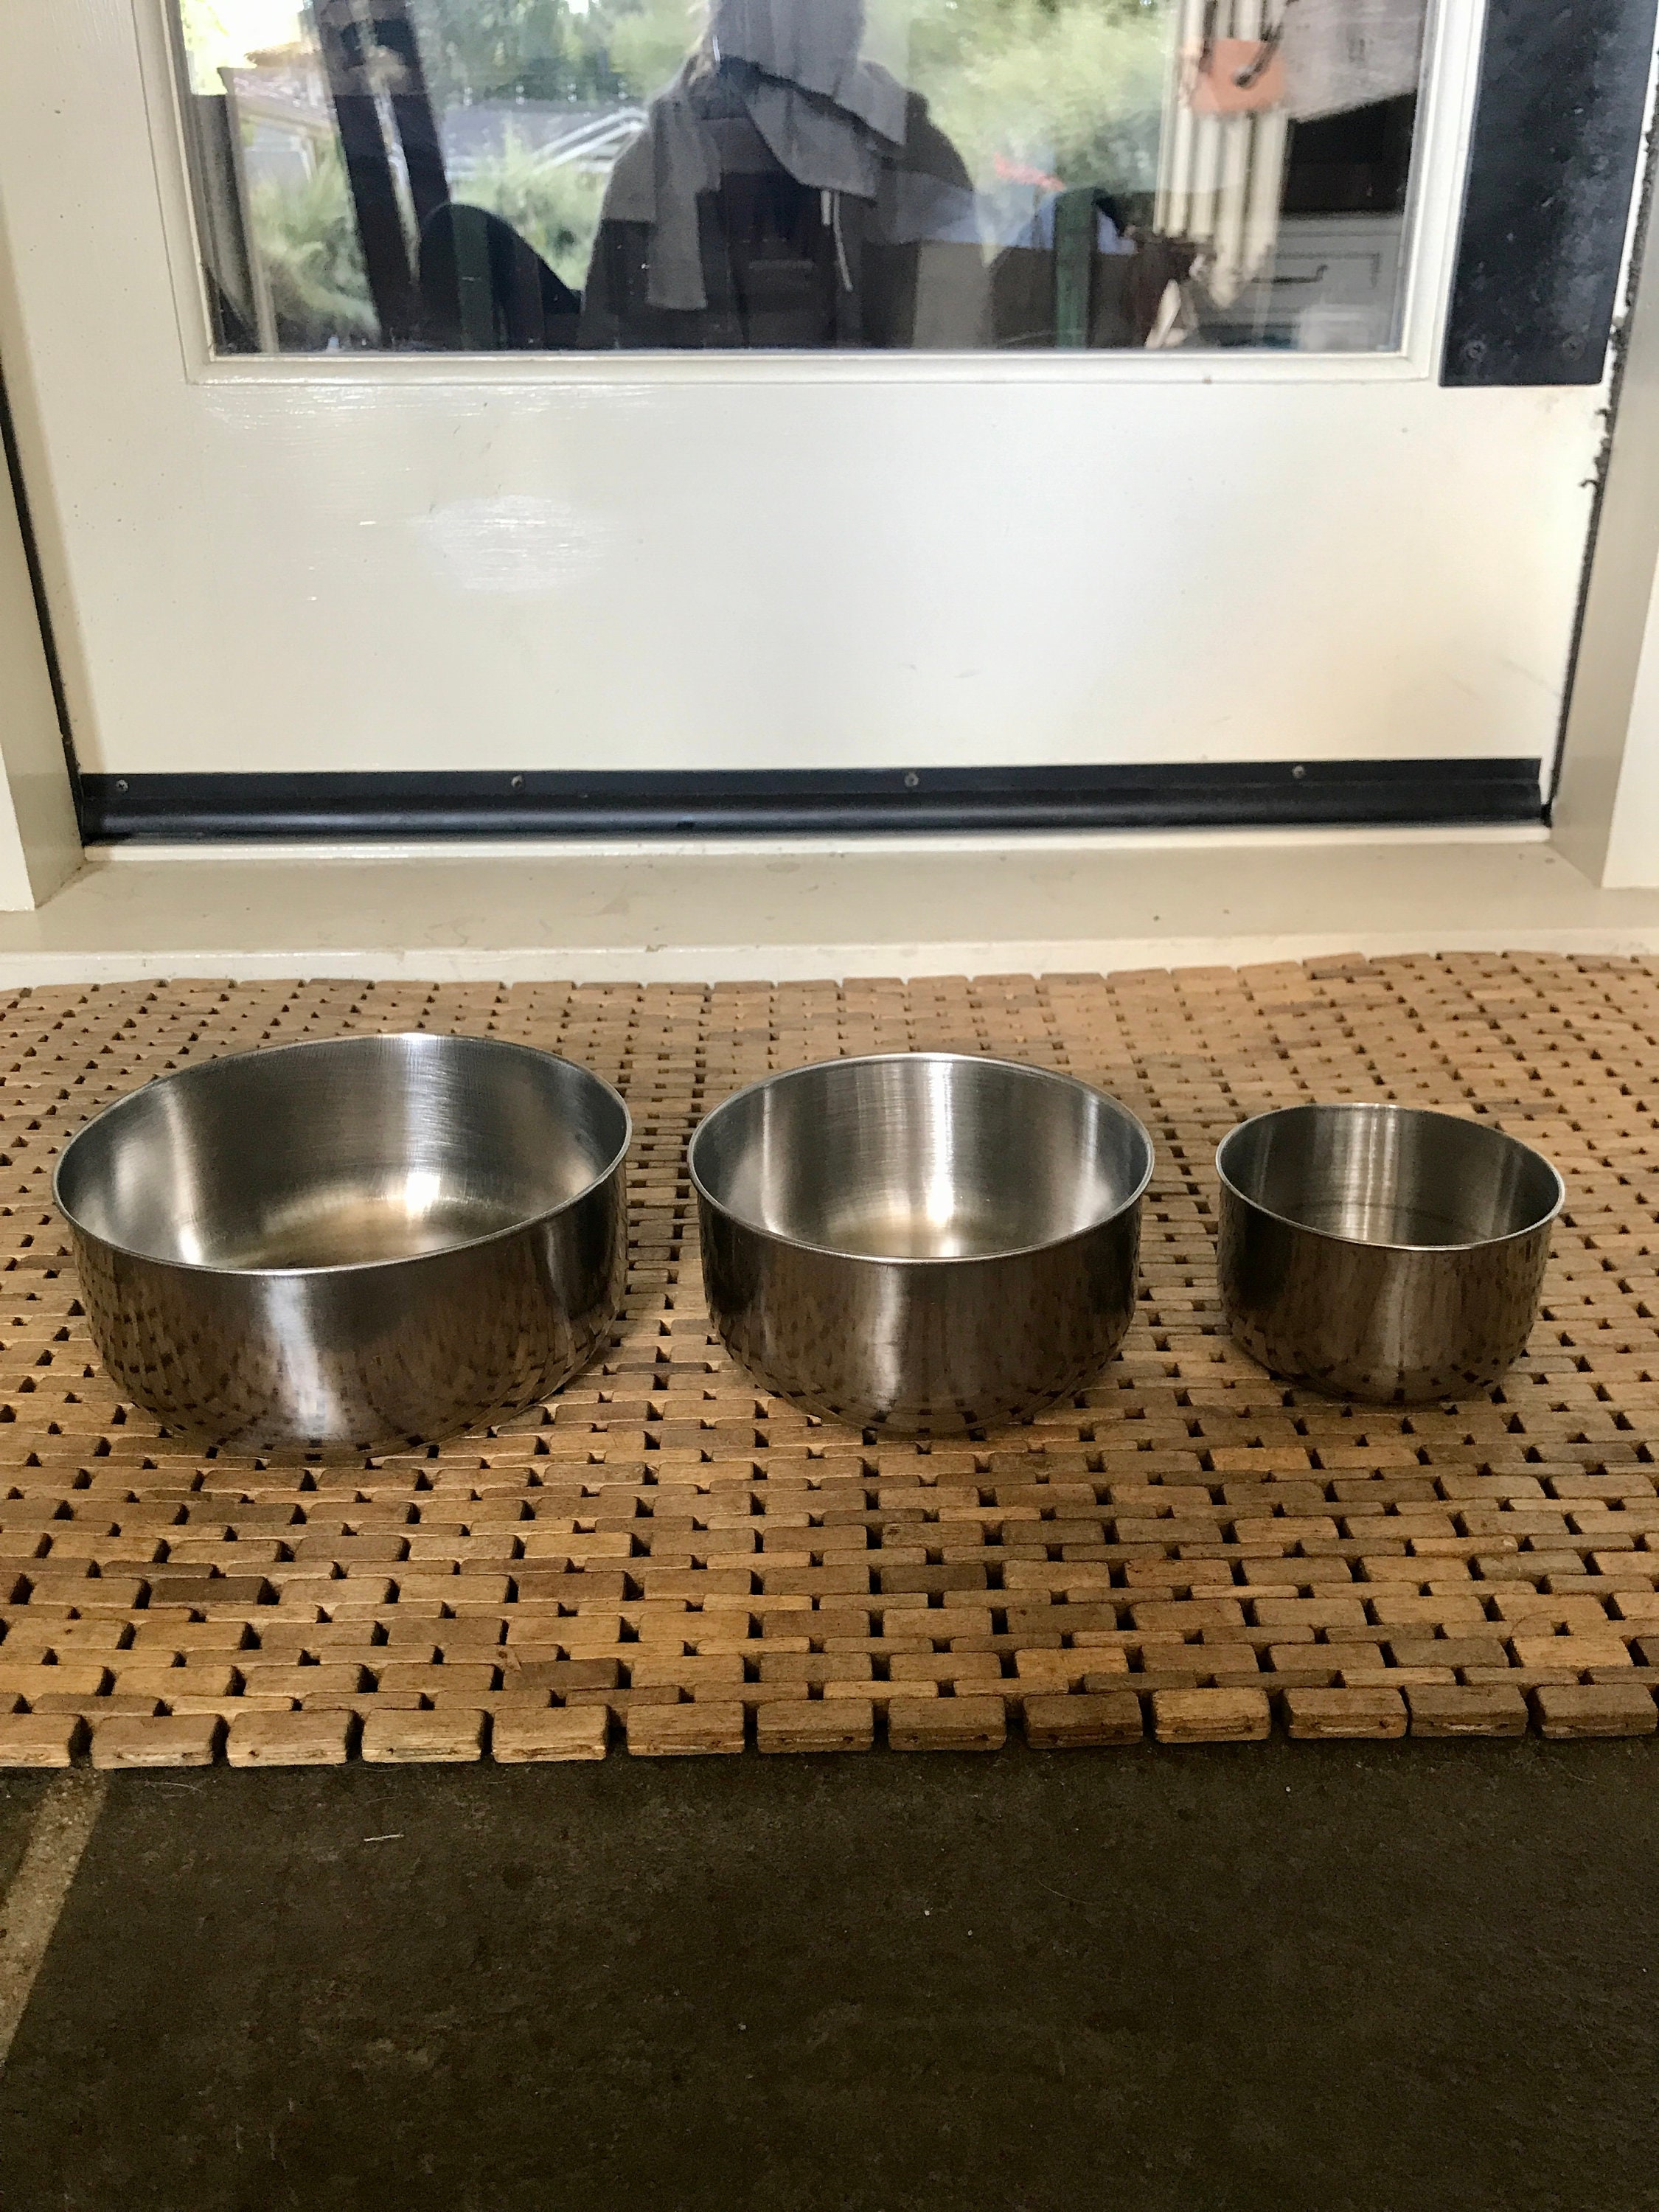 Stainless Steel Mixing Bowls — Set of 3